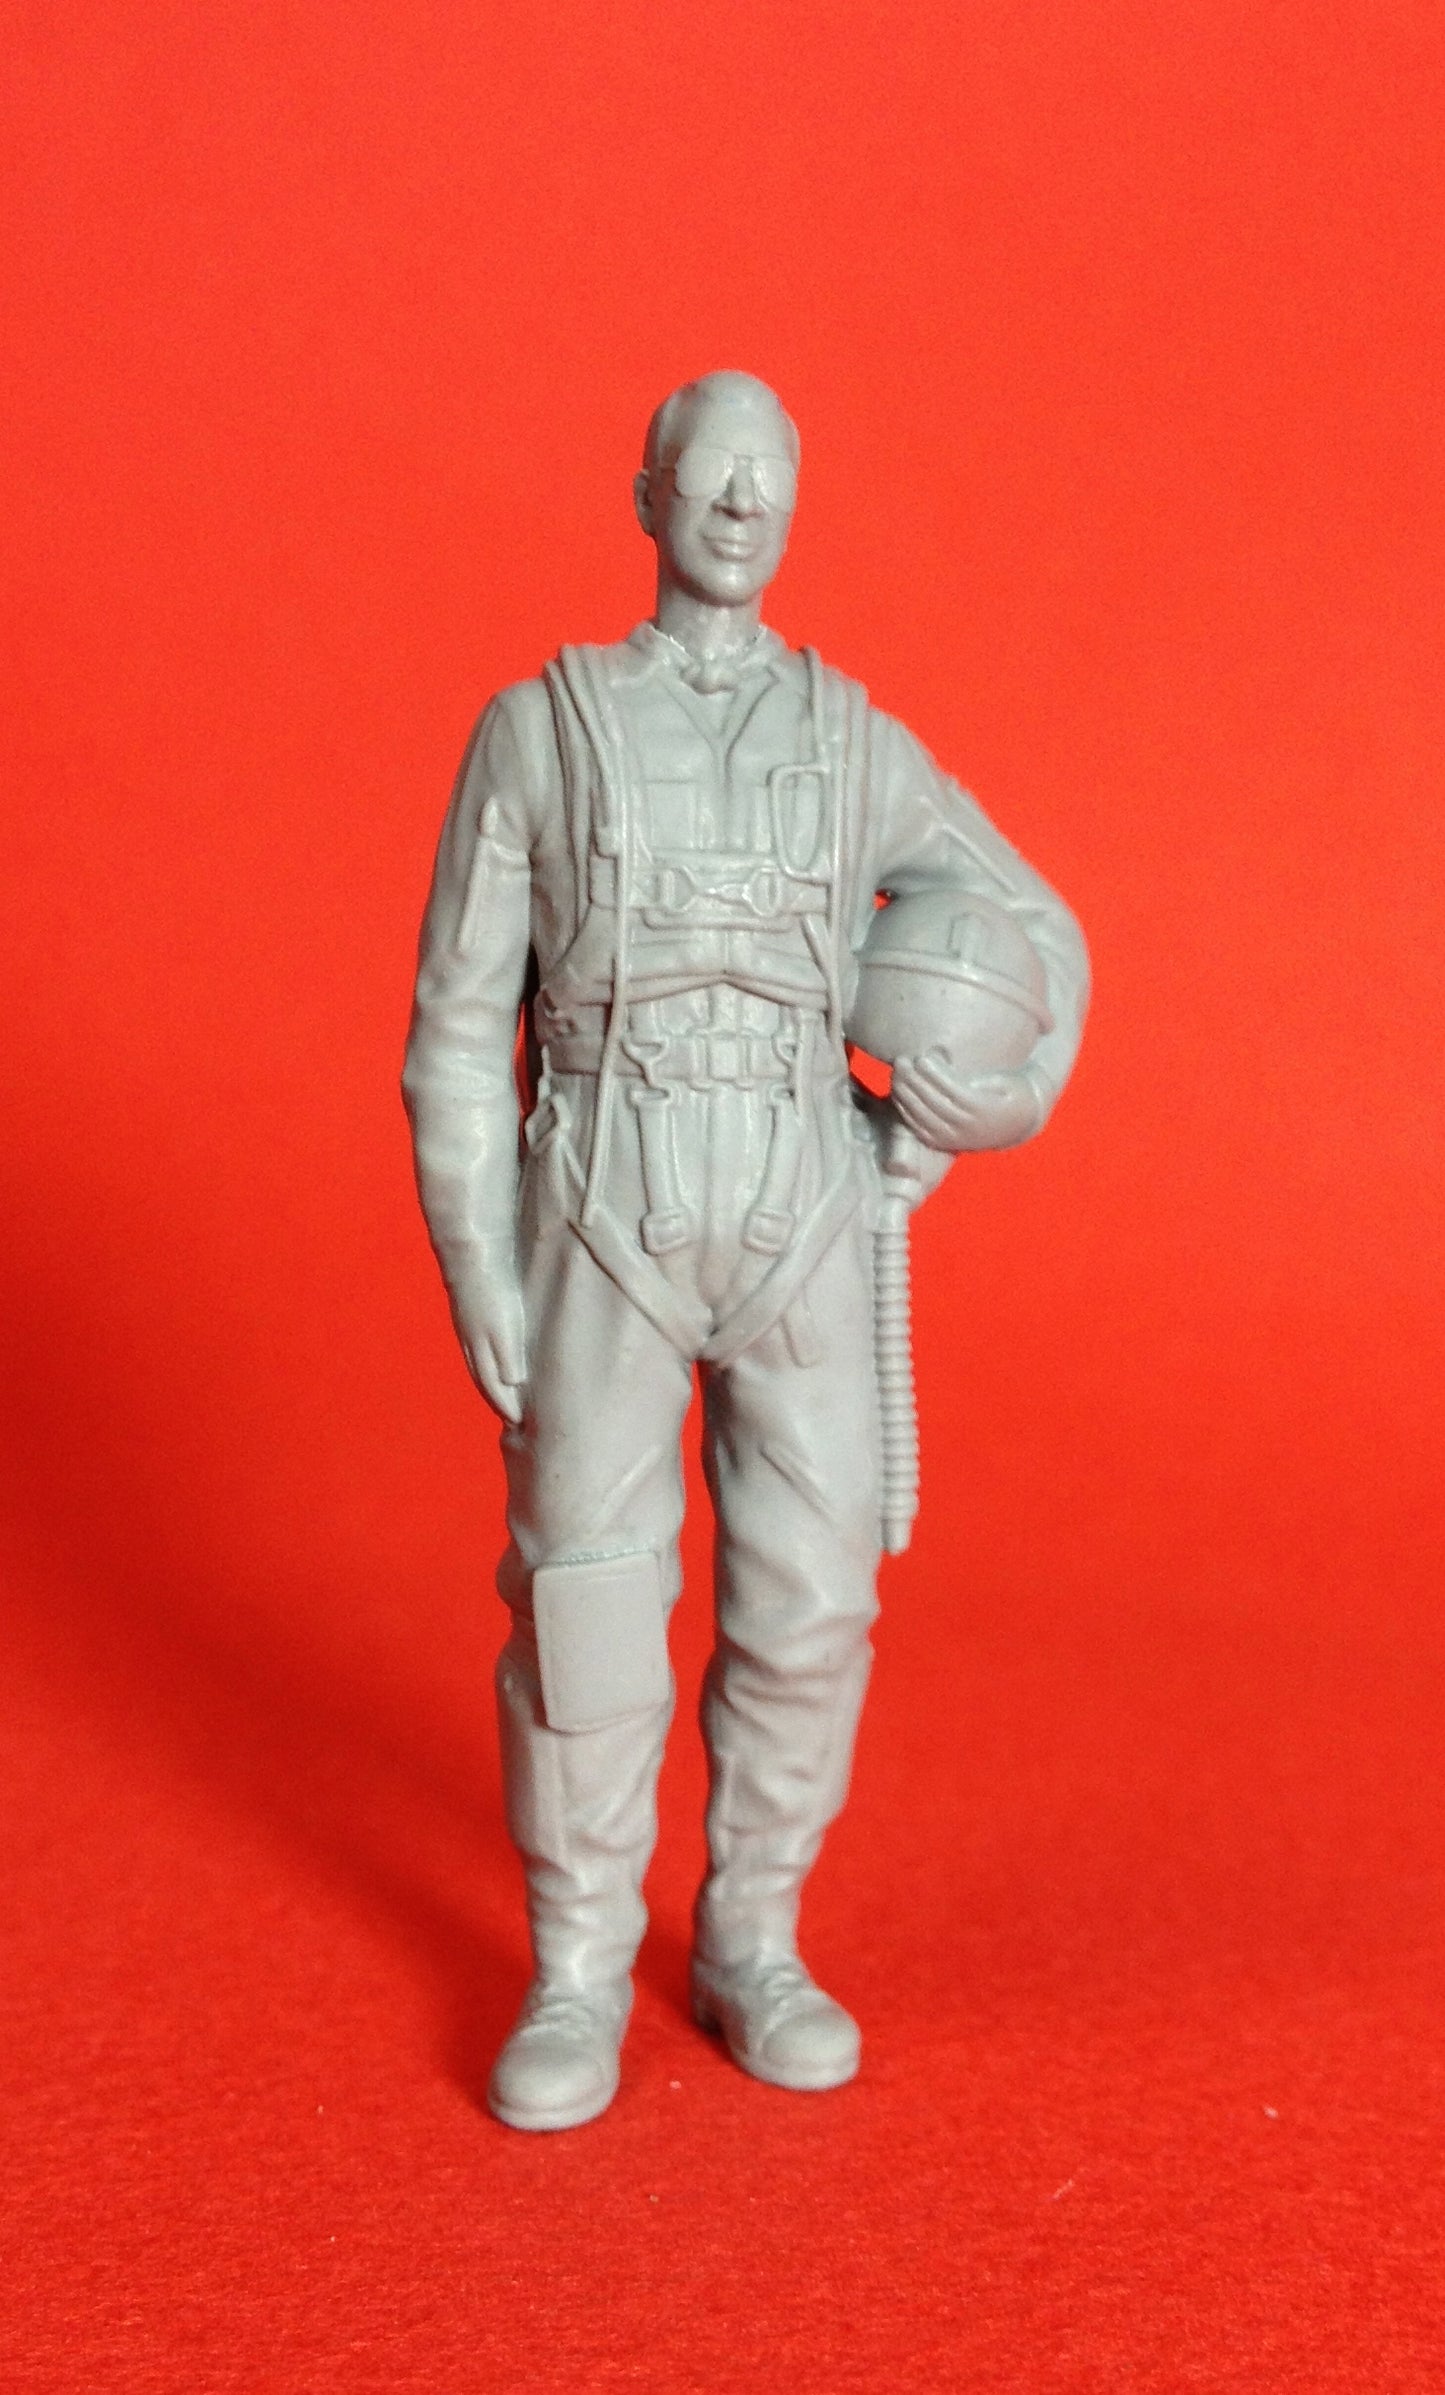 1/72 scale Swedish pilot as seen from the 1950s to the early 1970s. Art # 72P002